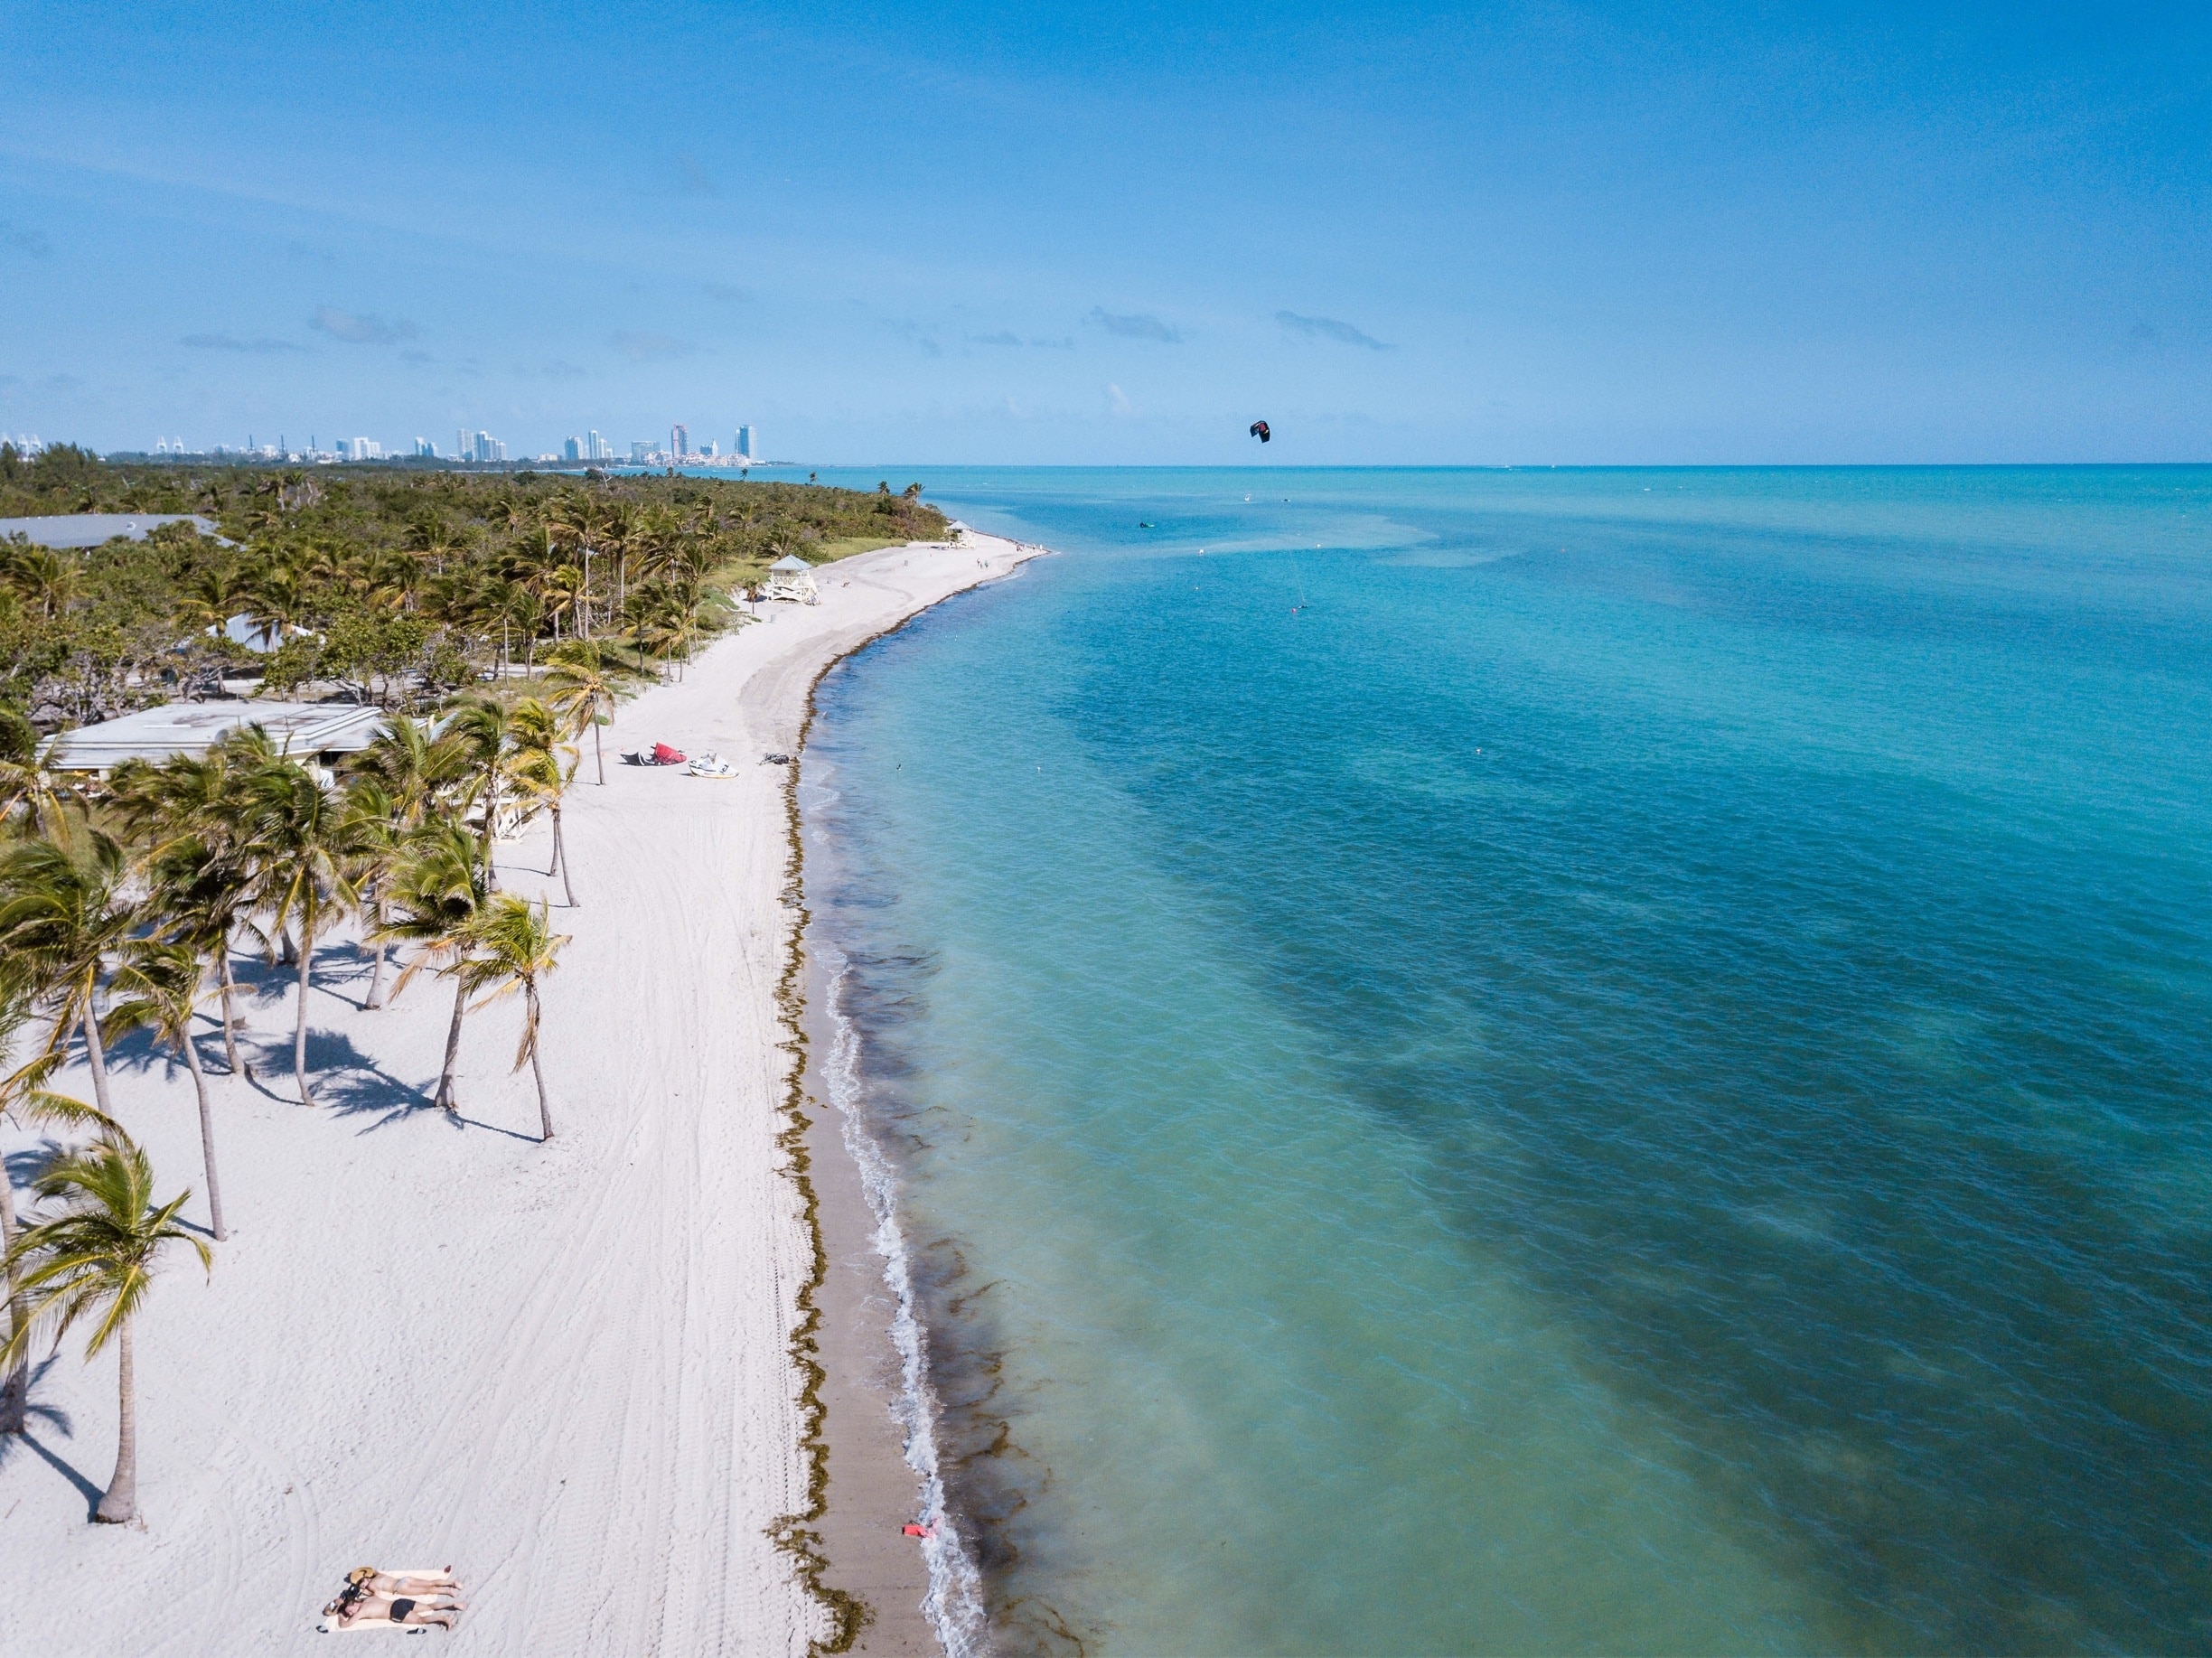 Fancy kite surfing? 
Miami is a cool location to escape in winter. So great to have this entire place for yourself. Key Biscayne is just out from Miami downtown but you already have this tropical feeling from the keys. #BVSBlue 